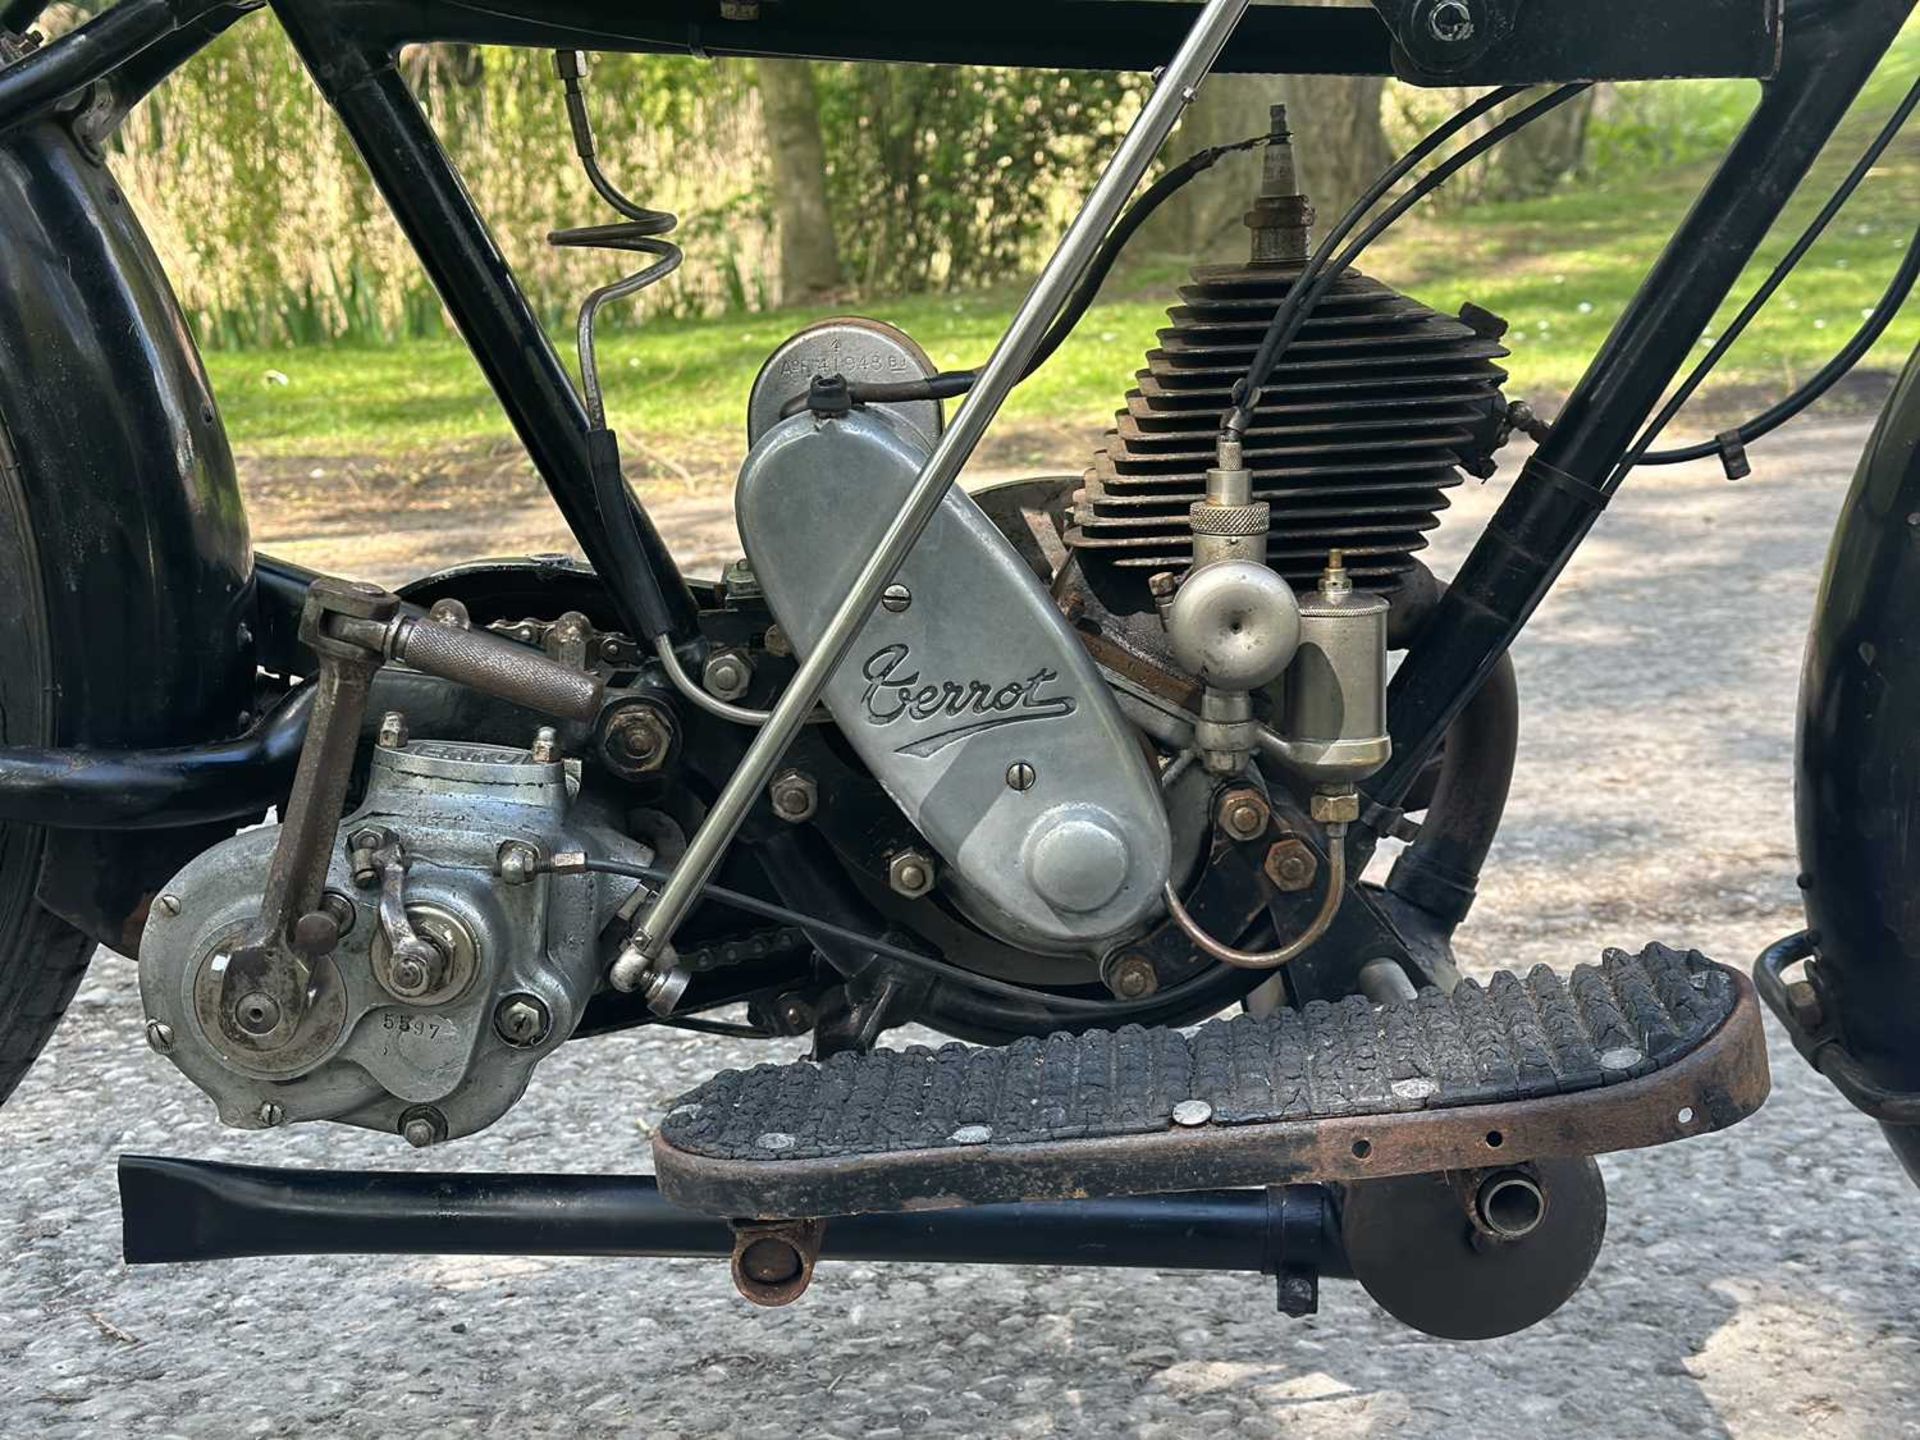 1927 Terrot 250cc Two-stroke - Image 12 of 15